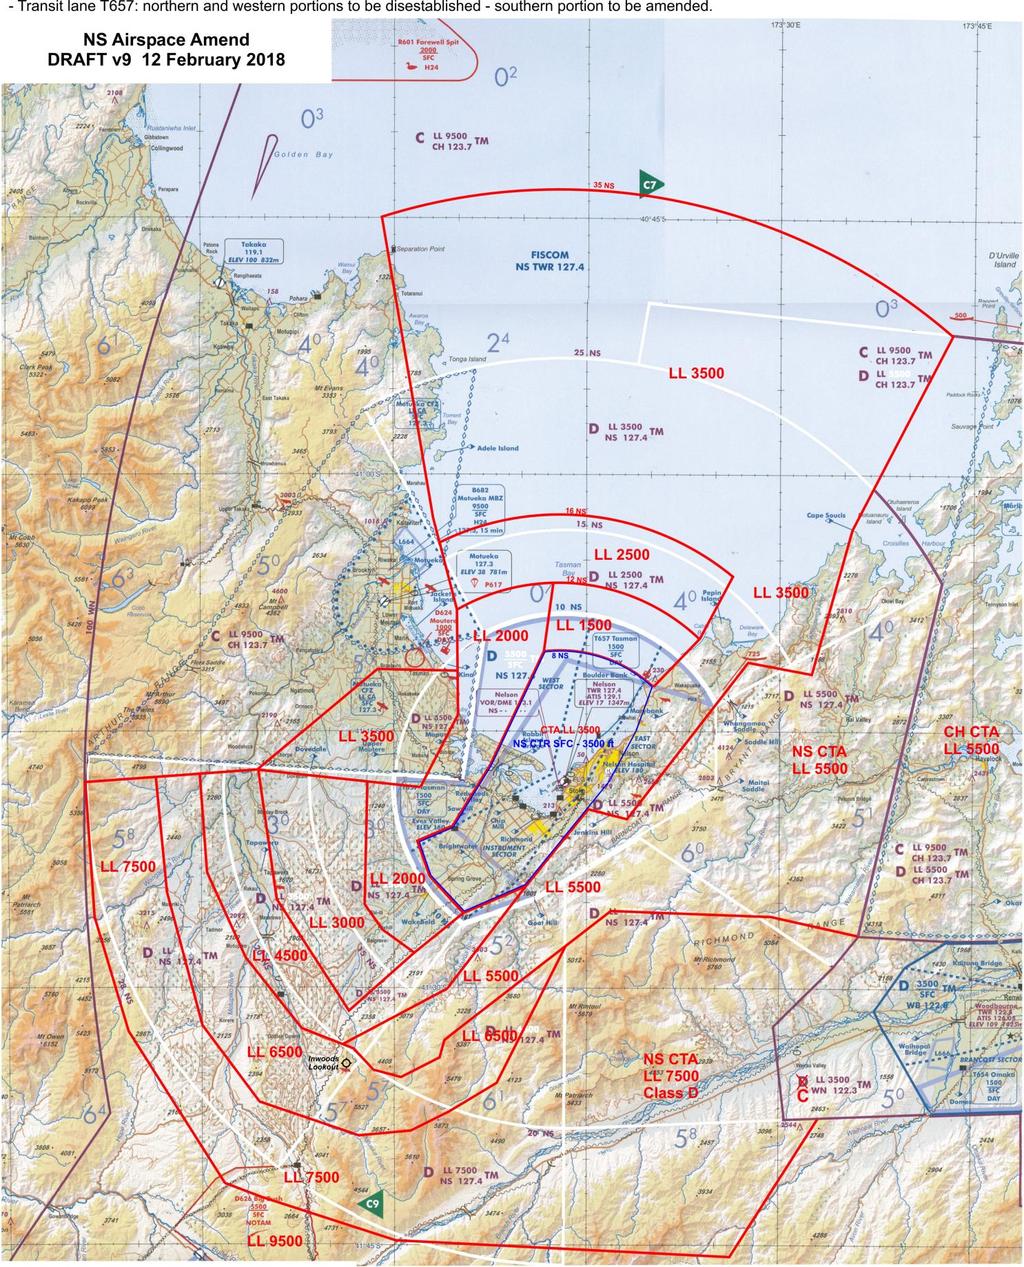 Diagram 1 below depicts the Airways proposed amended Nelson control zone (NS CTR) and Nelson control area (NS CTA).